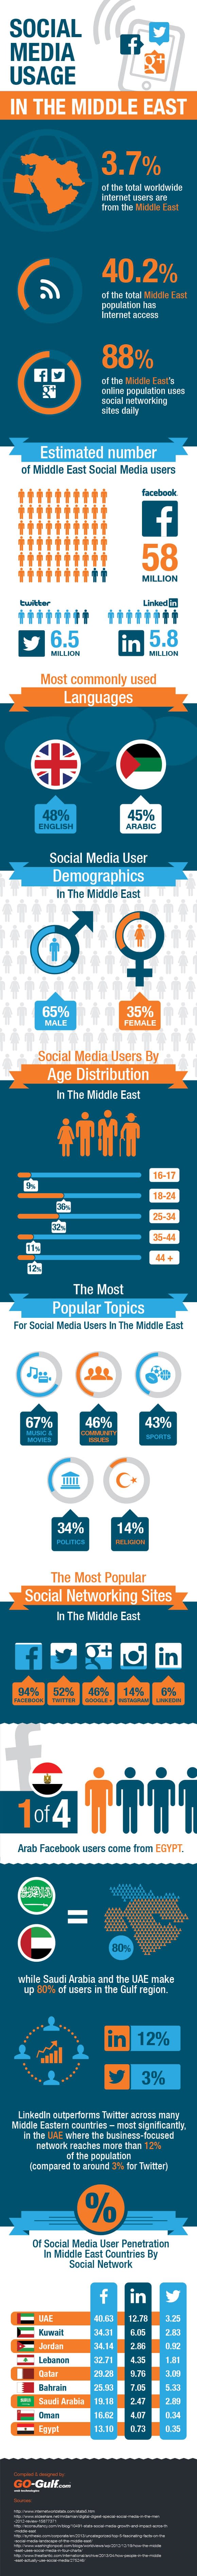 Social Media Usage in Middle East - Statistics and Trends 